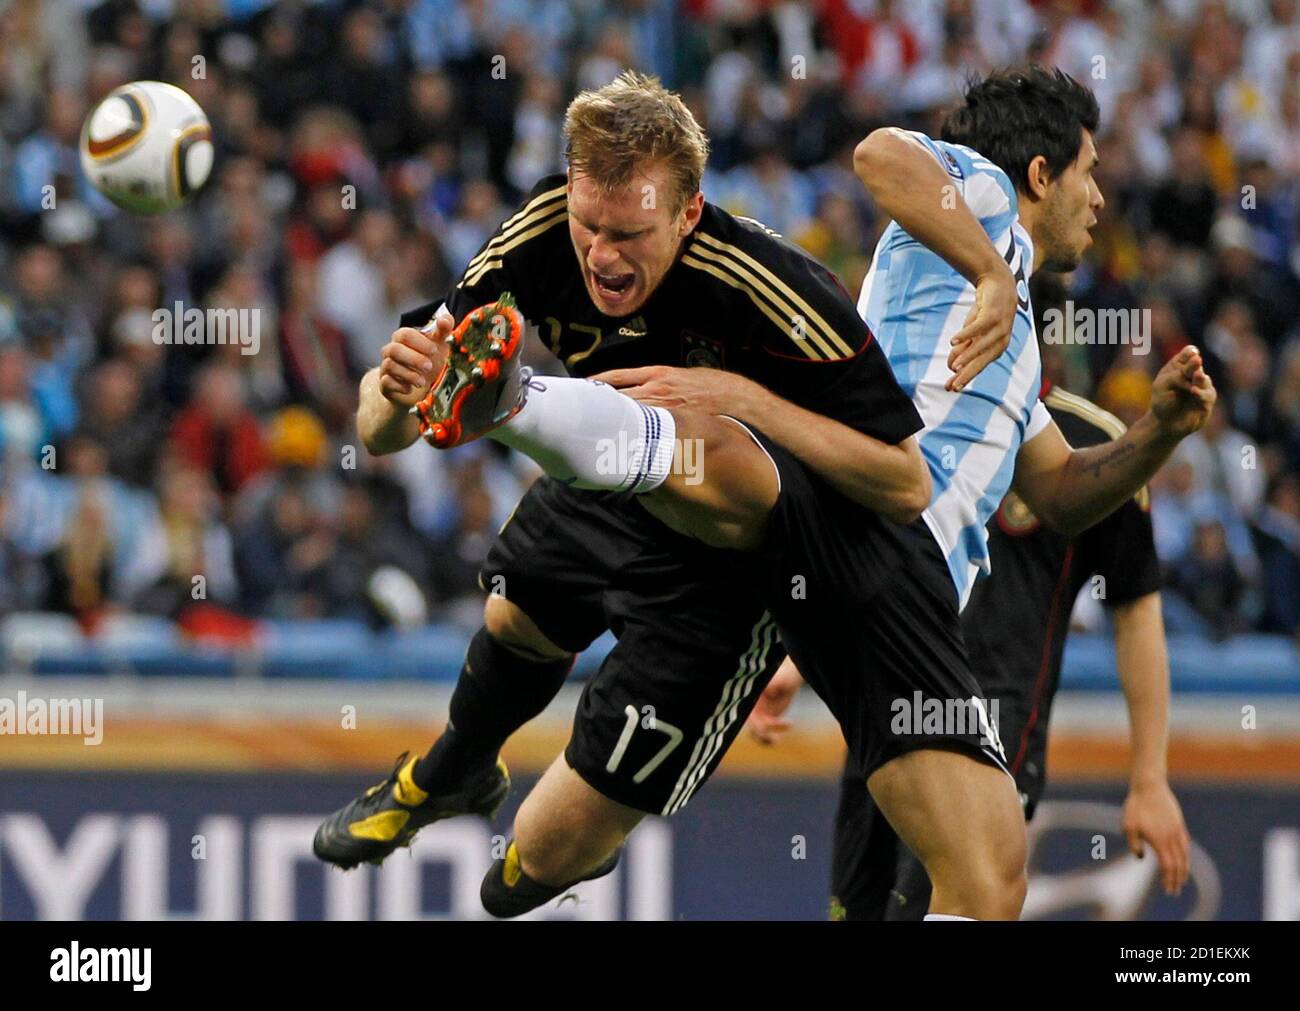 Argentina's Sergio Aguero fights for the ball with Germany's Per Mertesacker (L) during their 2010 World Cup quarter-final soccer match at Green Point stadium in Cape Town July 3, 2010. REUTERS/Carlos Barria (SOUTH AFRICA  - Tags: SPORT SOCCER WORLD CUP) Stock Photo